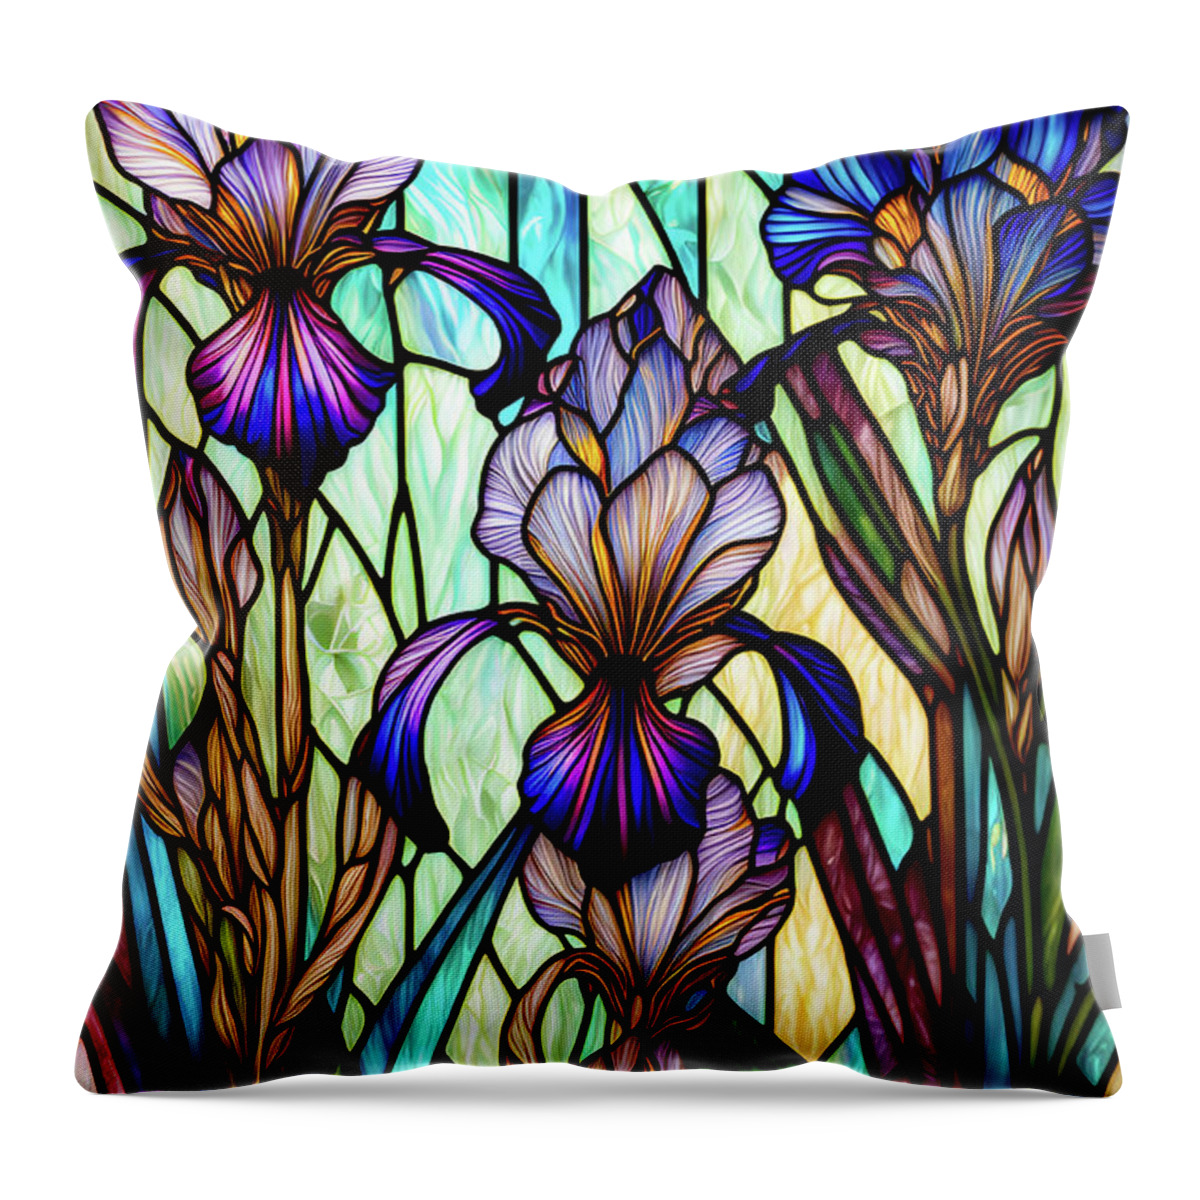 Irises Throw Pillow featuring the digital art Stained Glass Irises by Peggy Collins